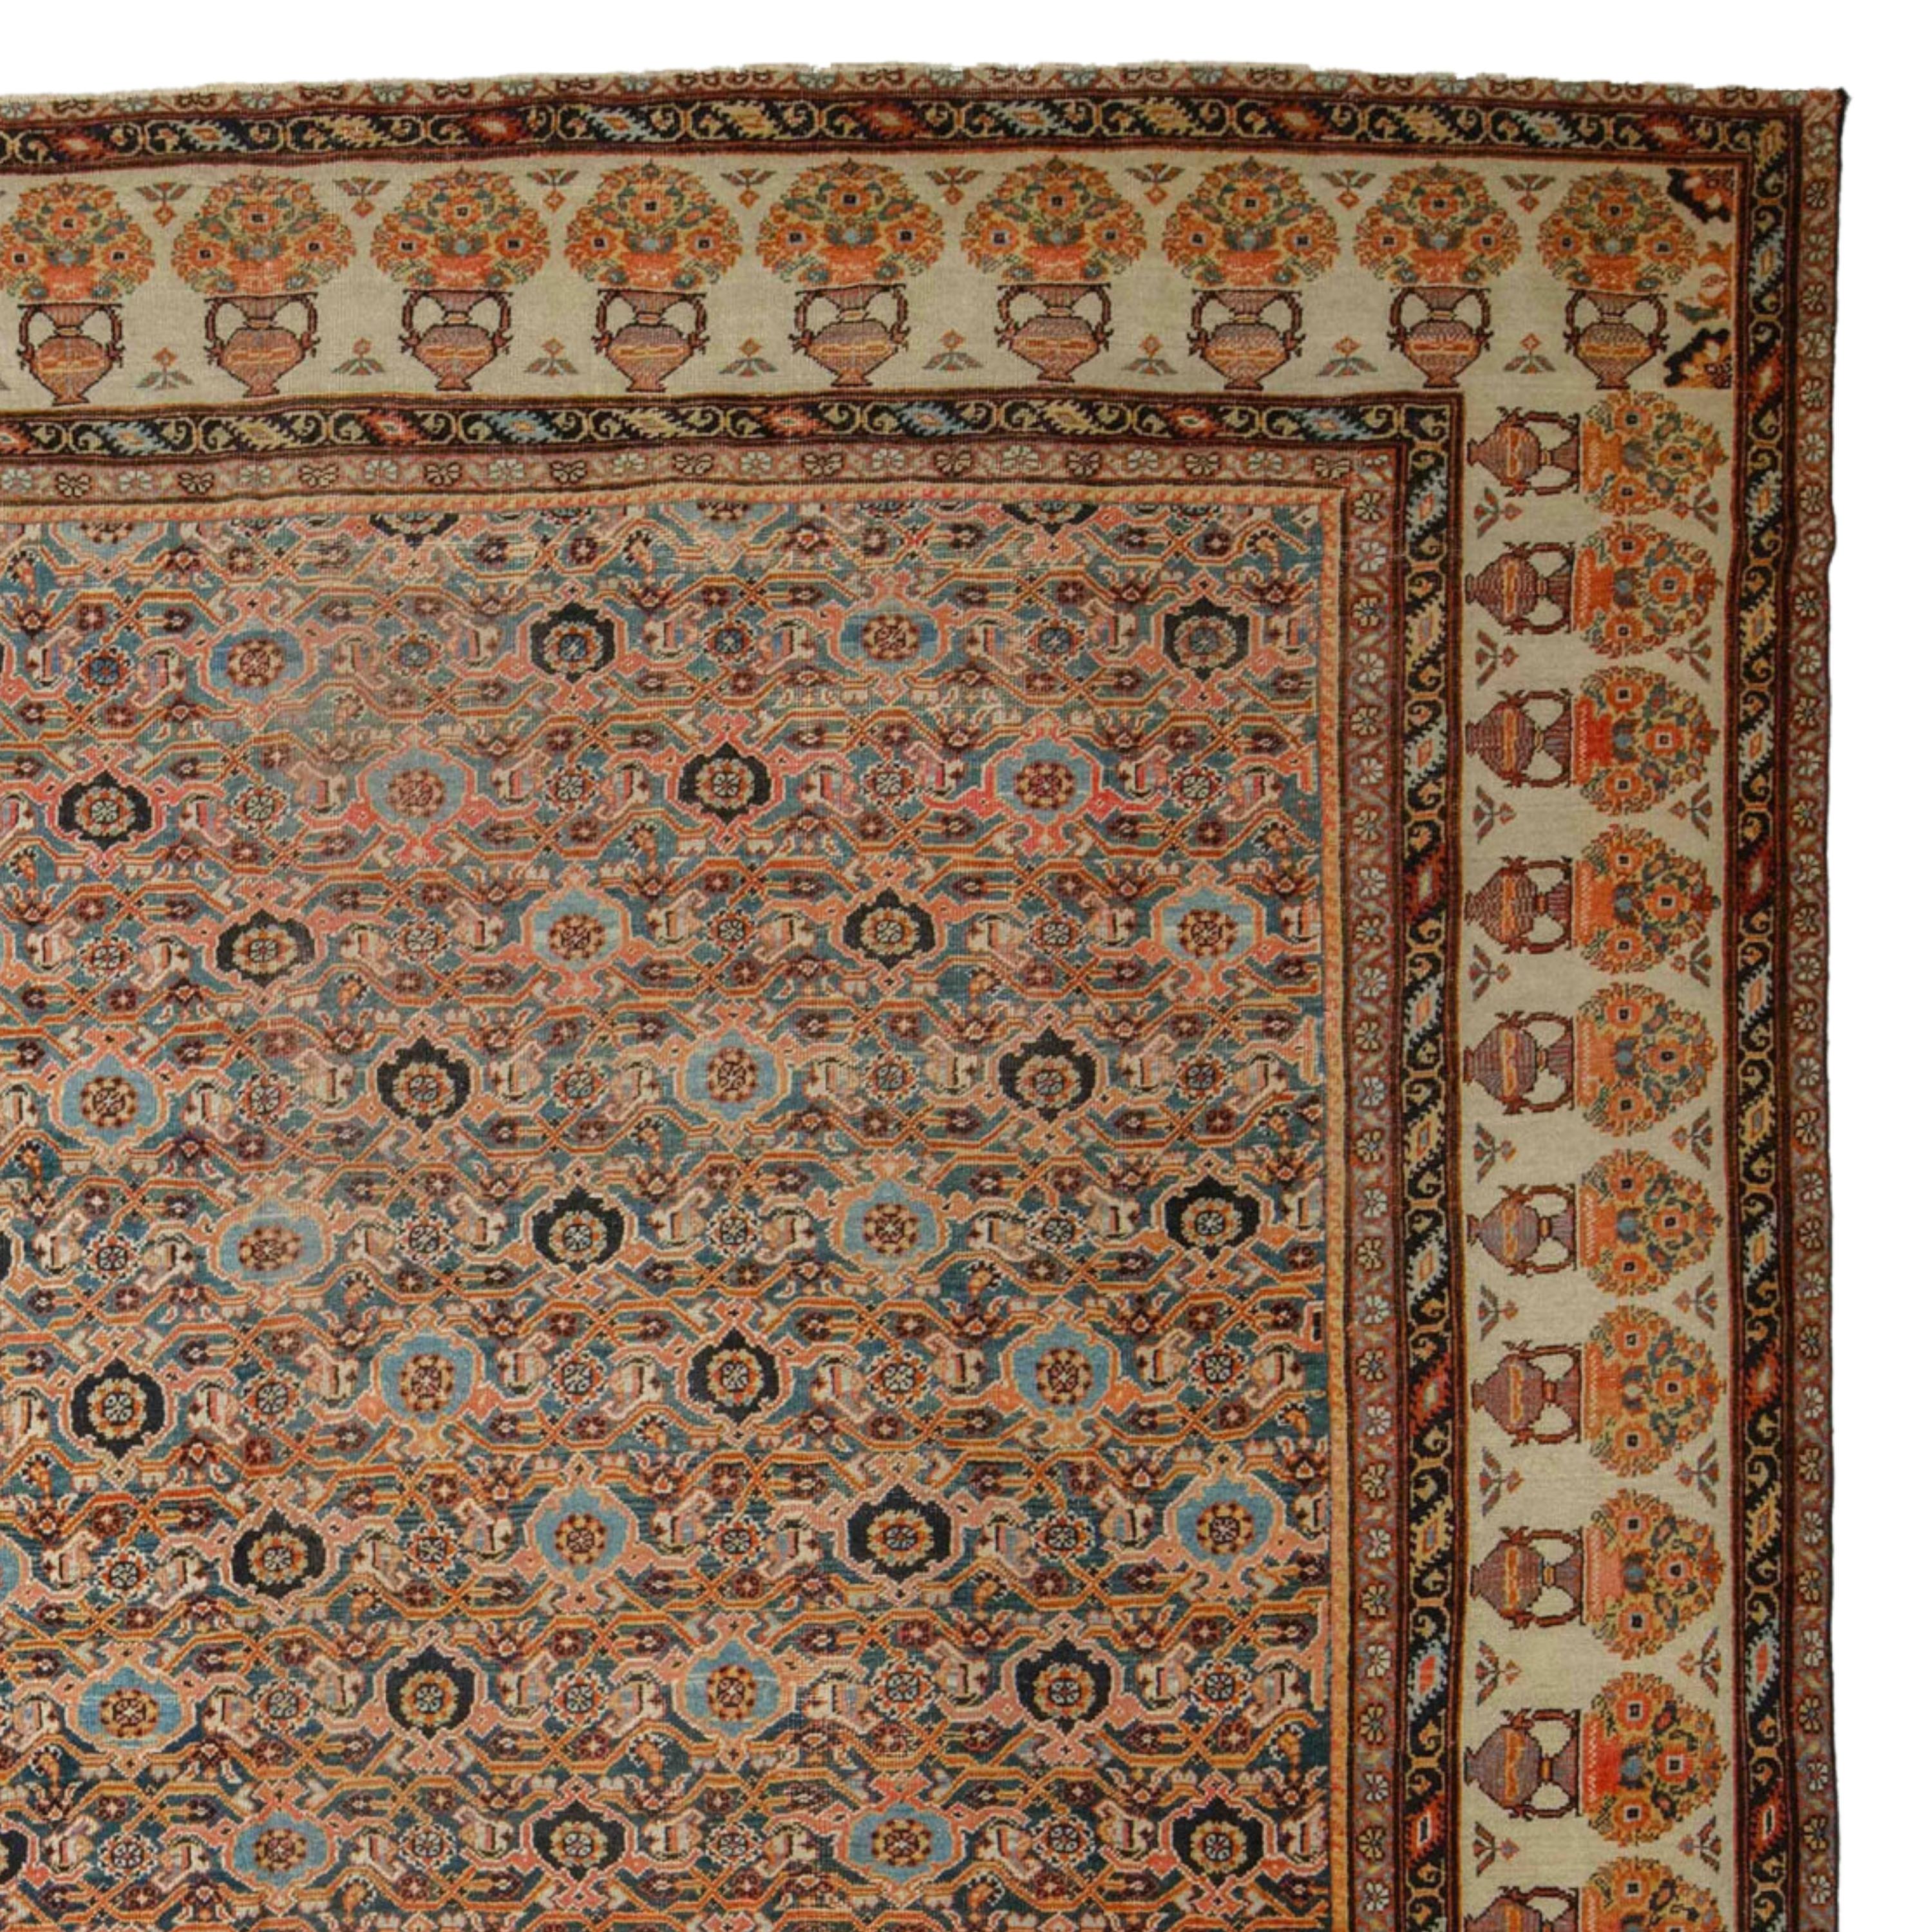 Antique Mahal Carpet - Late of 19th Century Mahal Rug, Antique Rug In Good Condition For Sale In Sultanahmet, 34